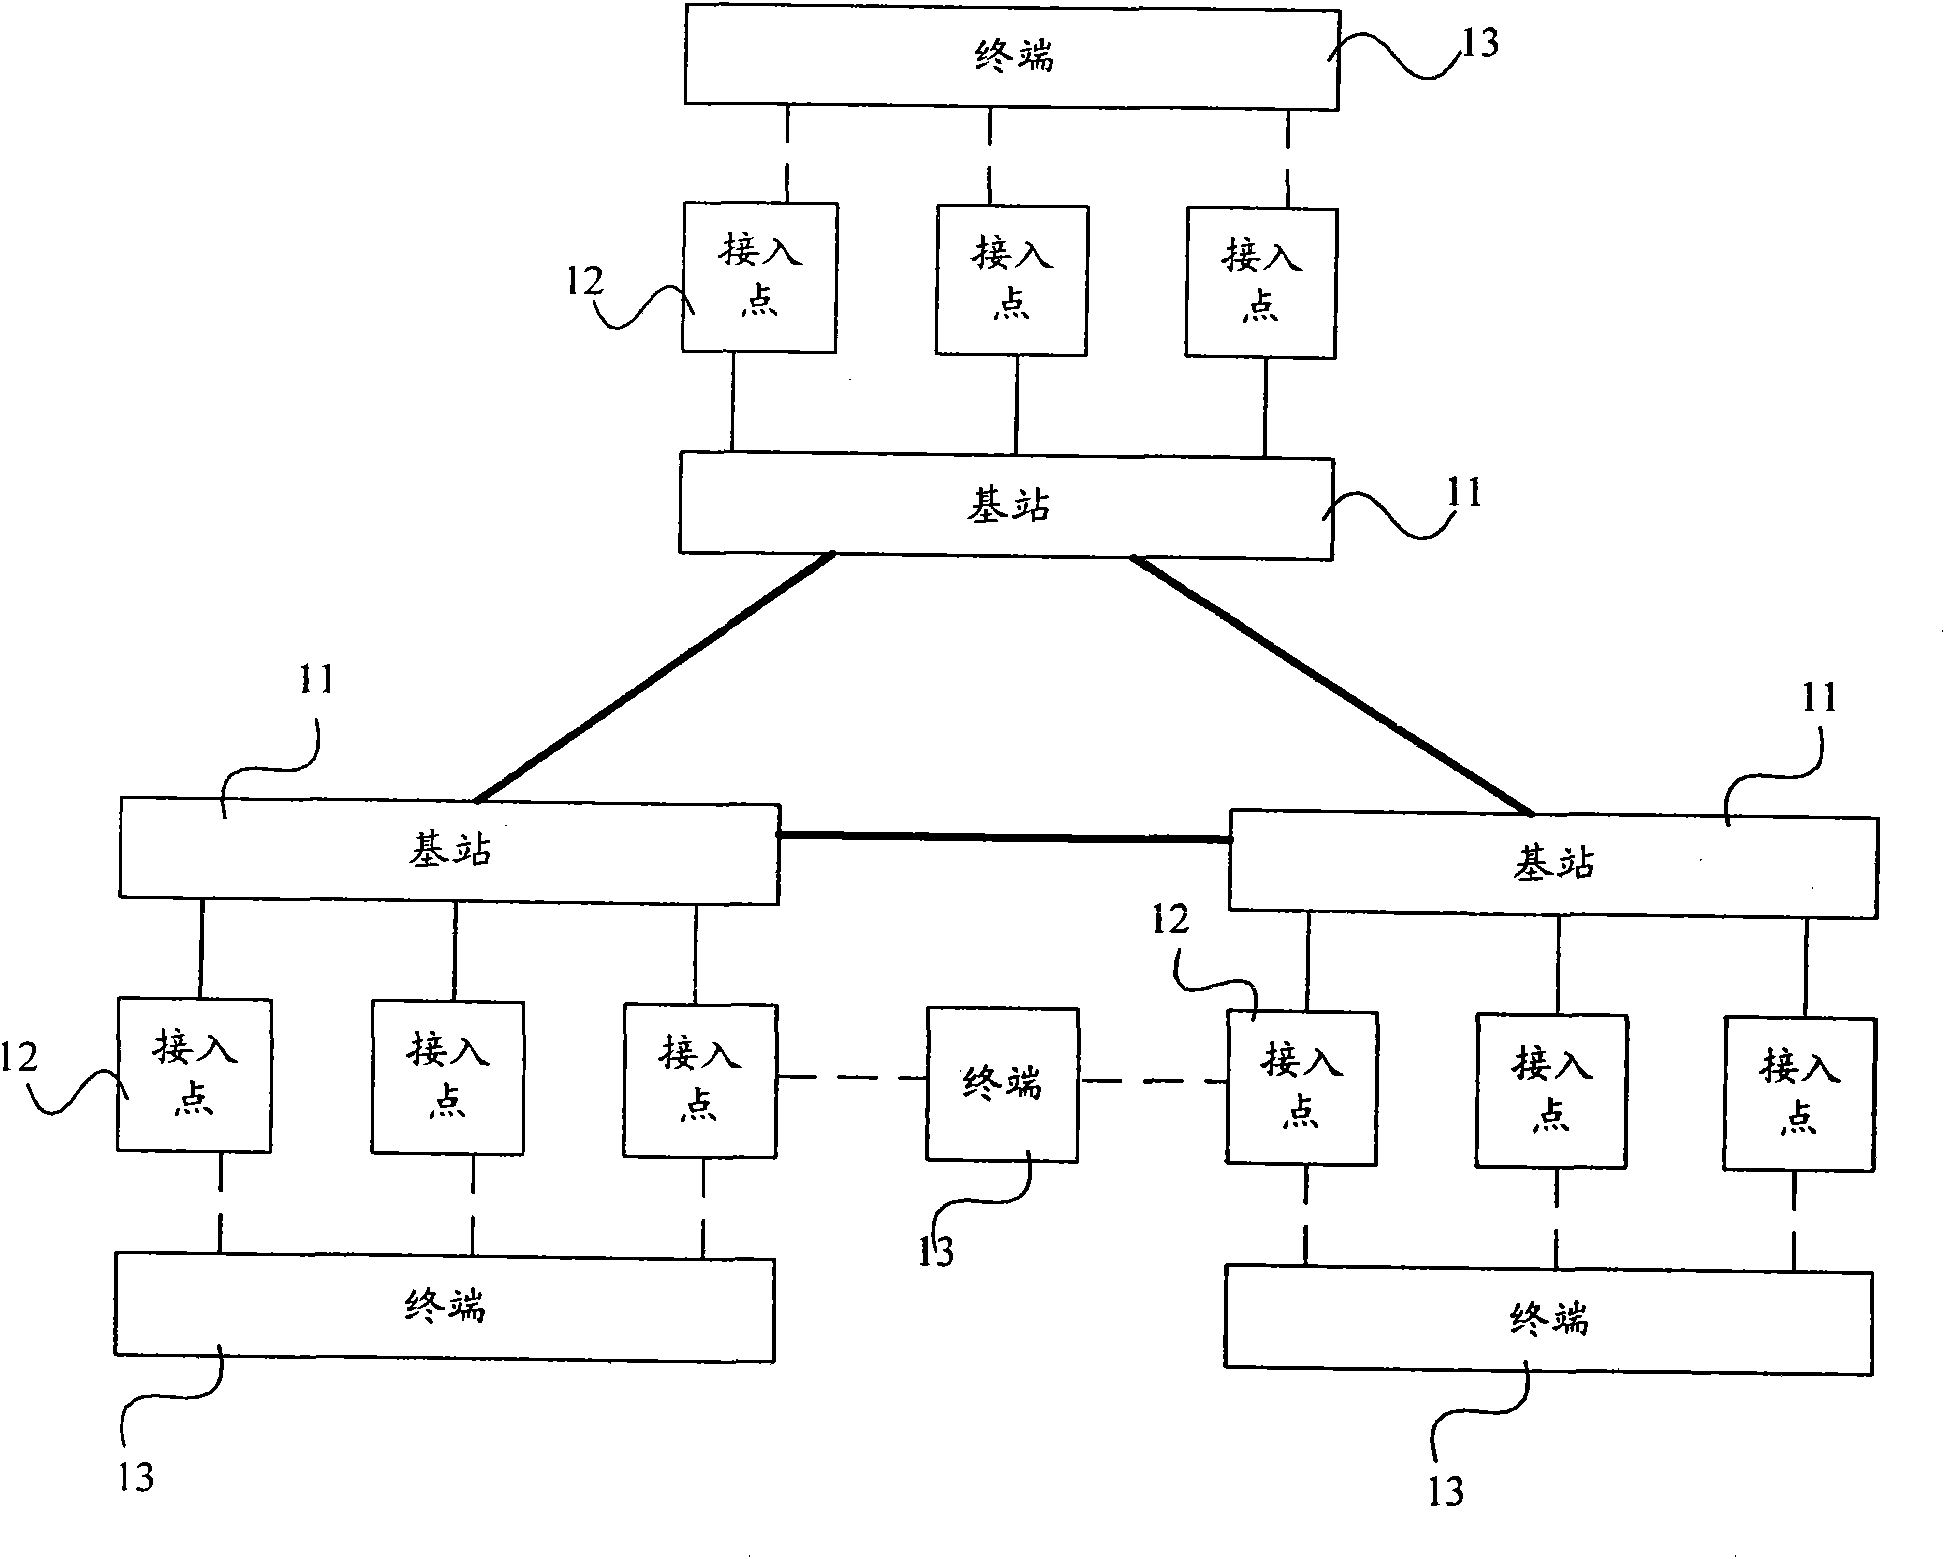 Downlink mode of transmission, network devices and wireless device in the coordinated multiple-point transmission systems